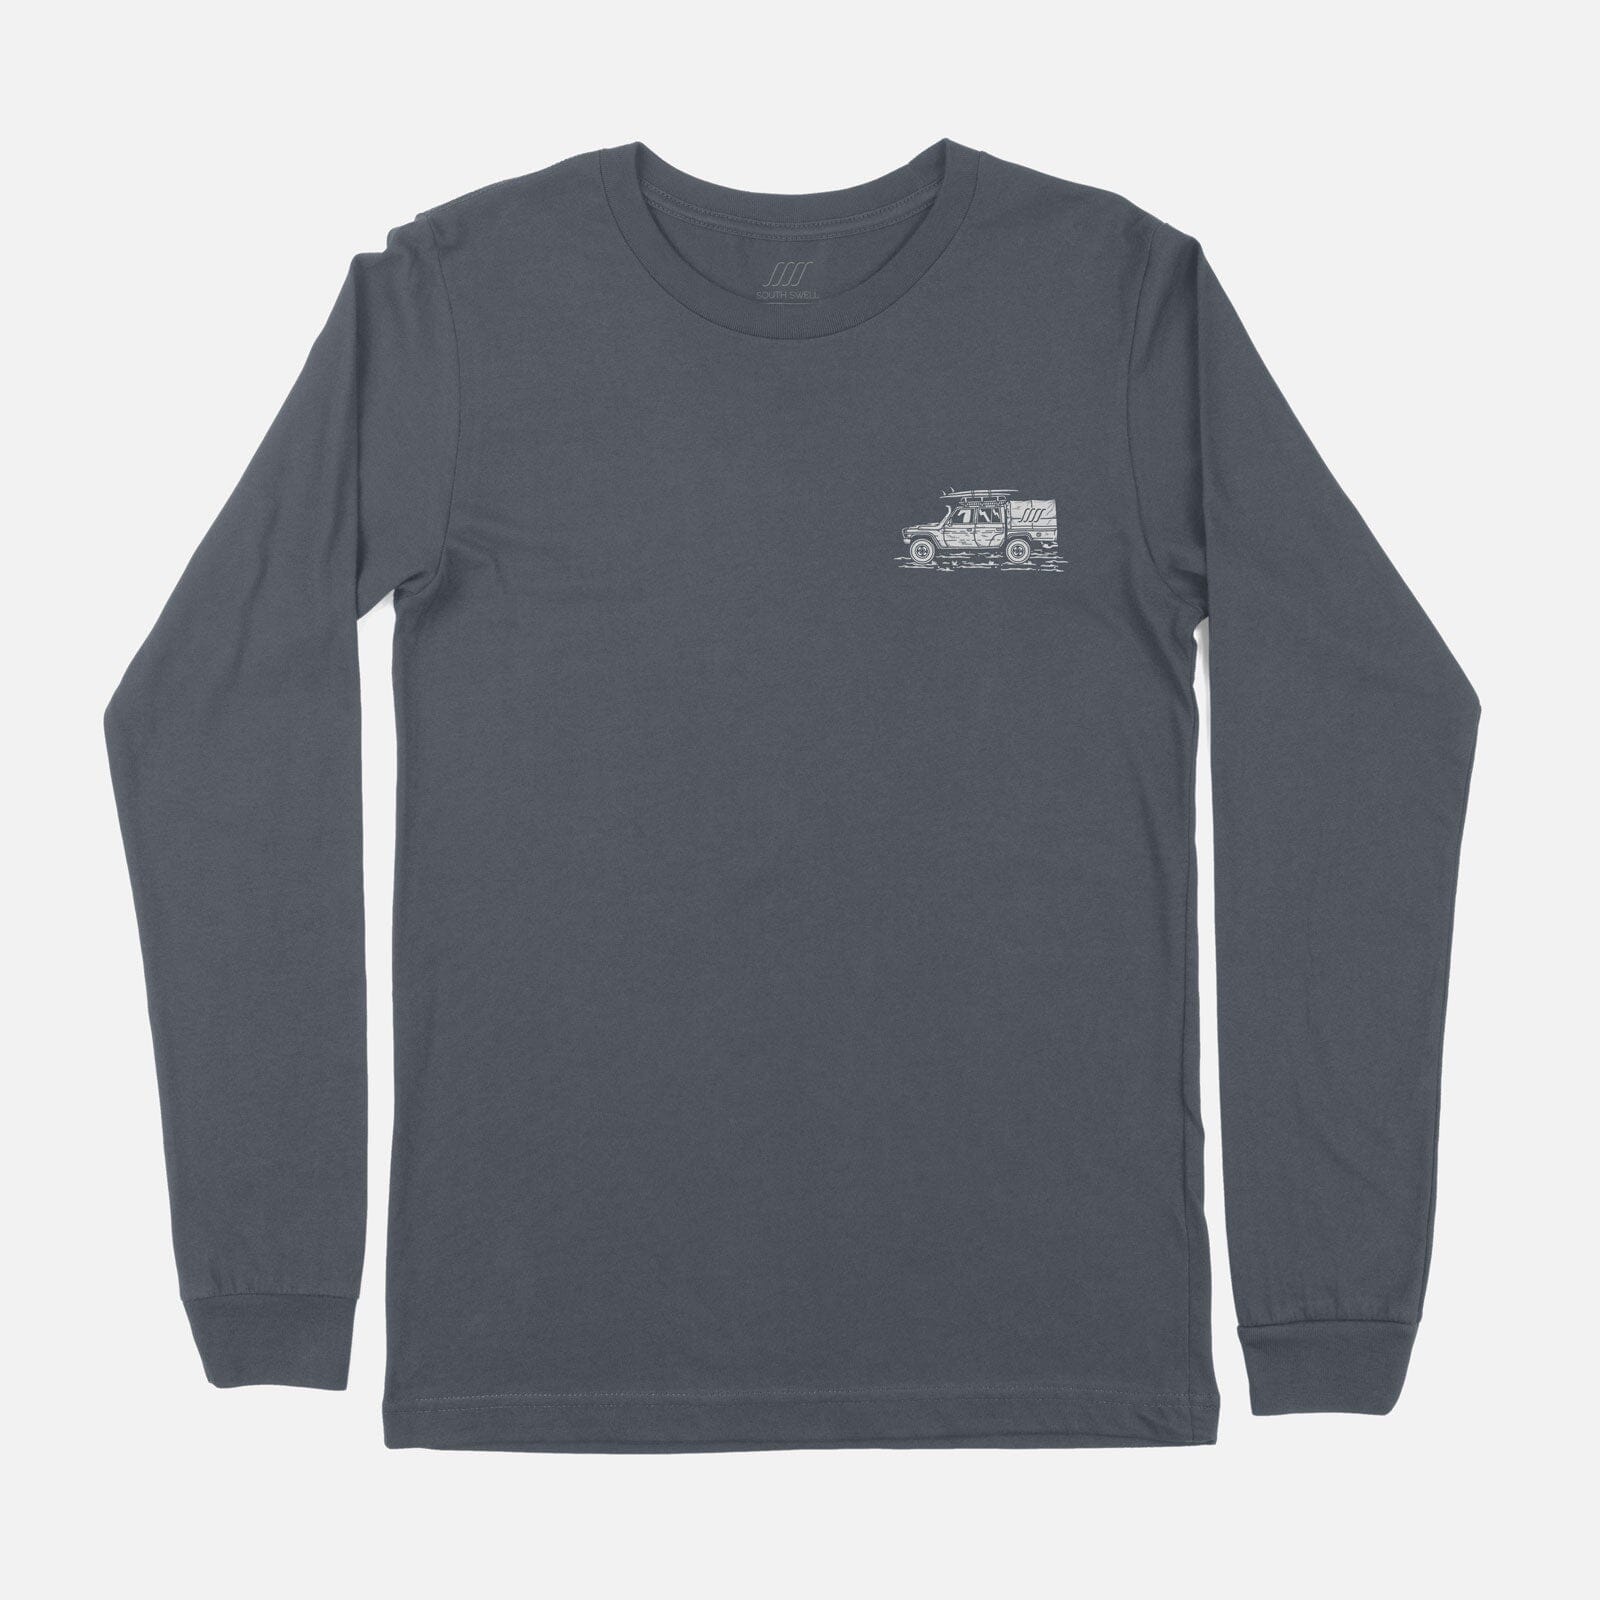 South Swell Get To The Point Longsleeve M Longsleeve Tee SOUTH SWELL 